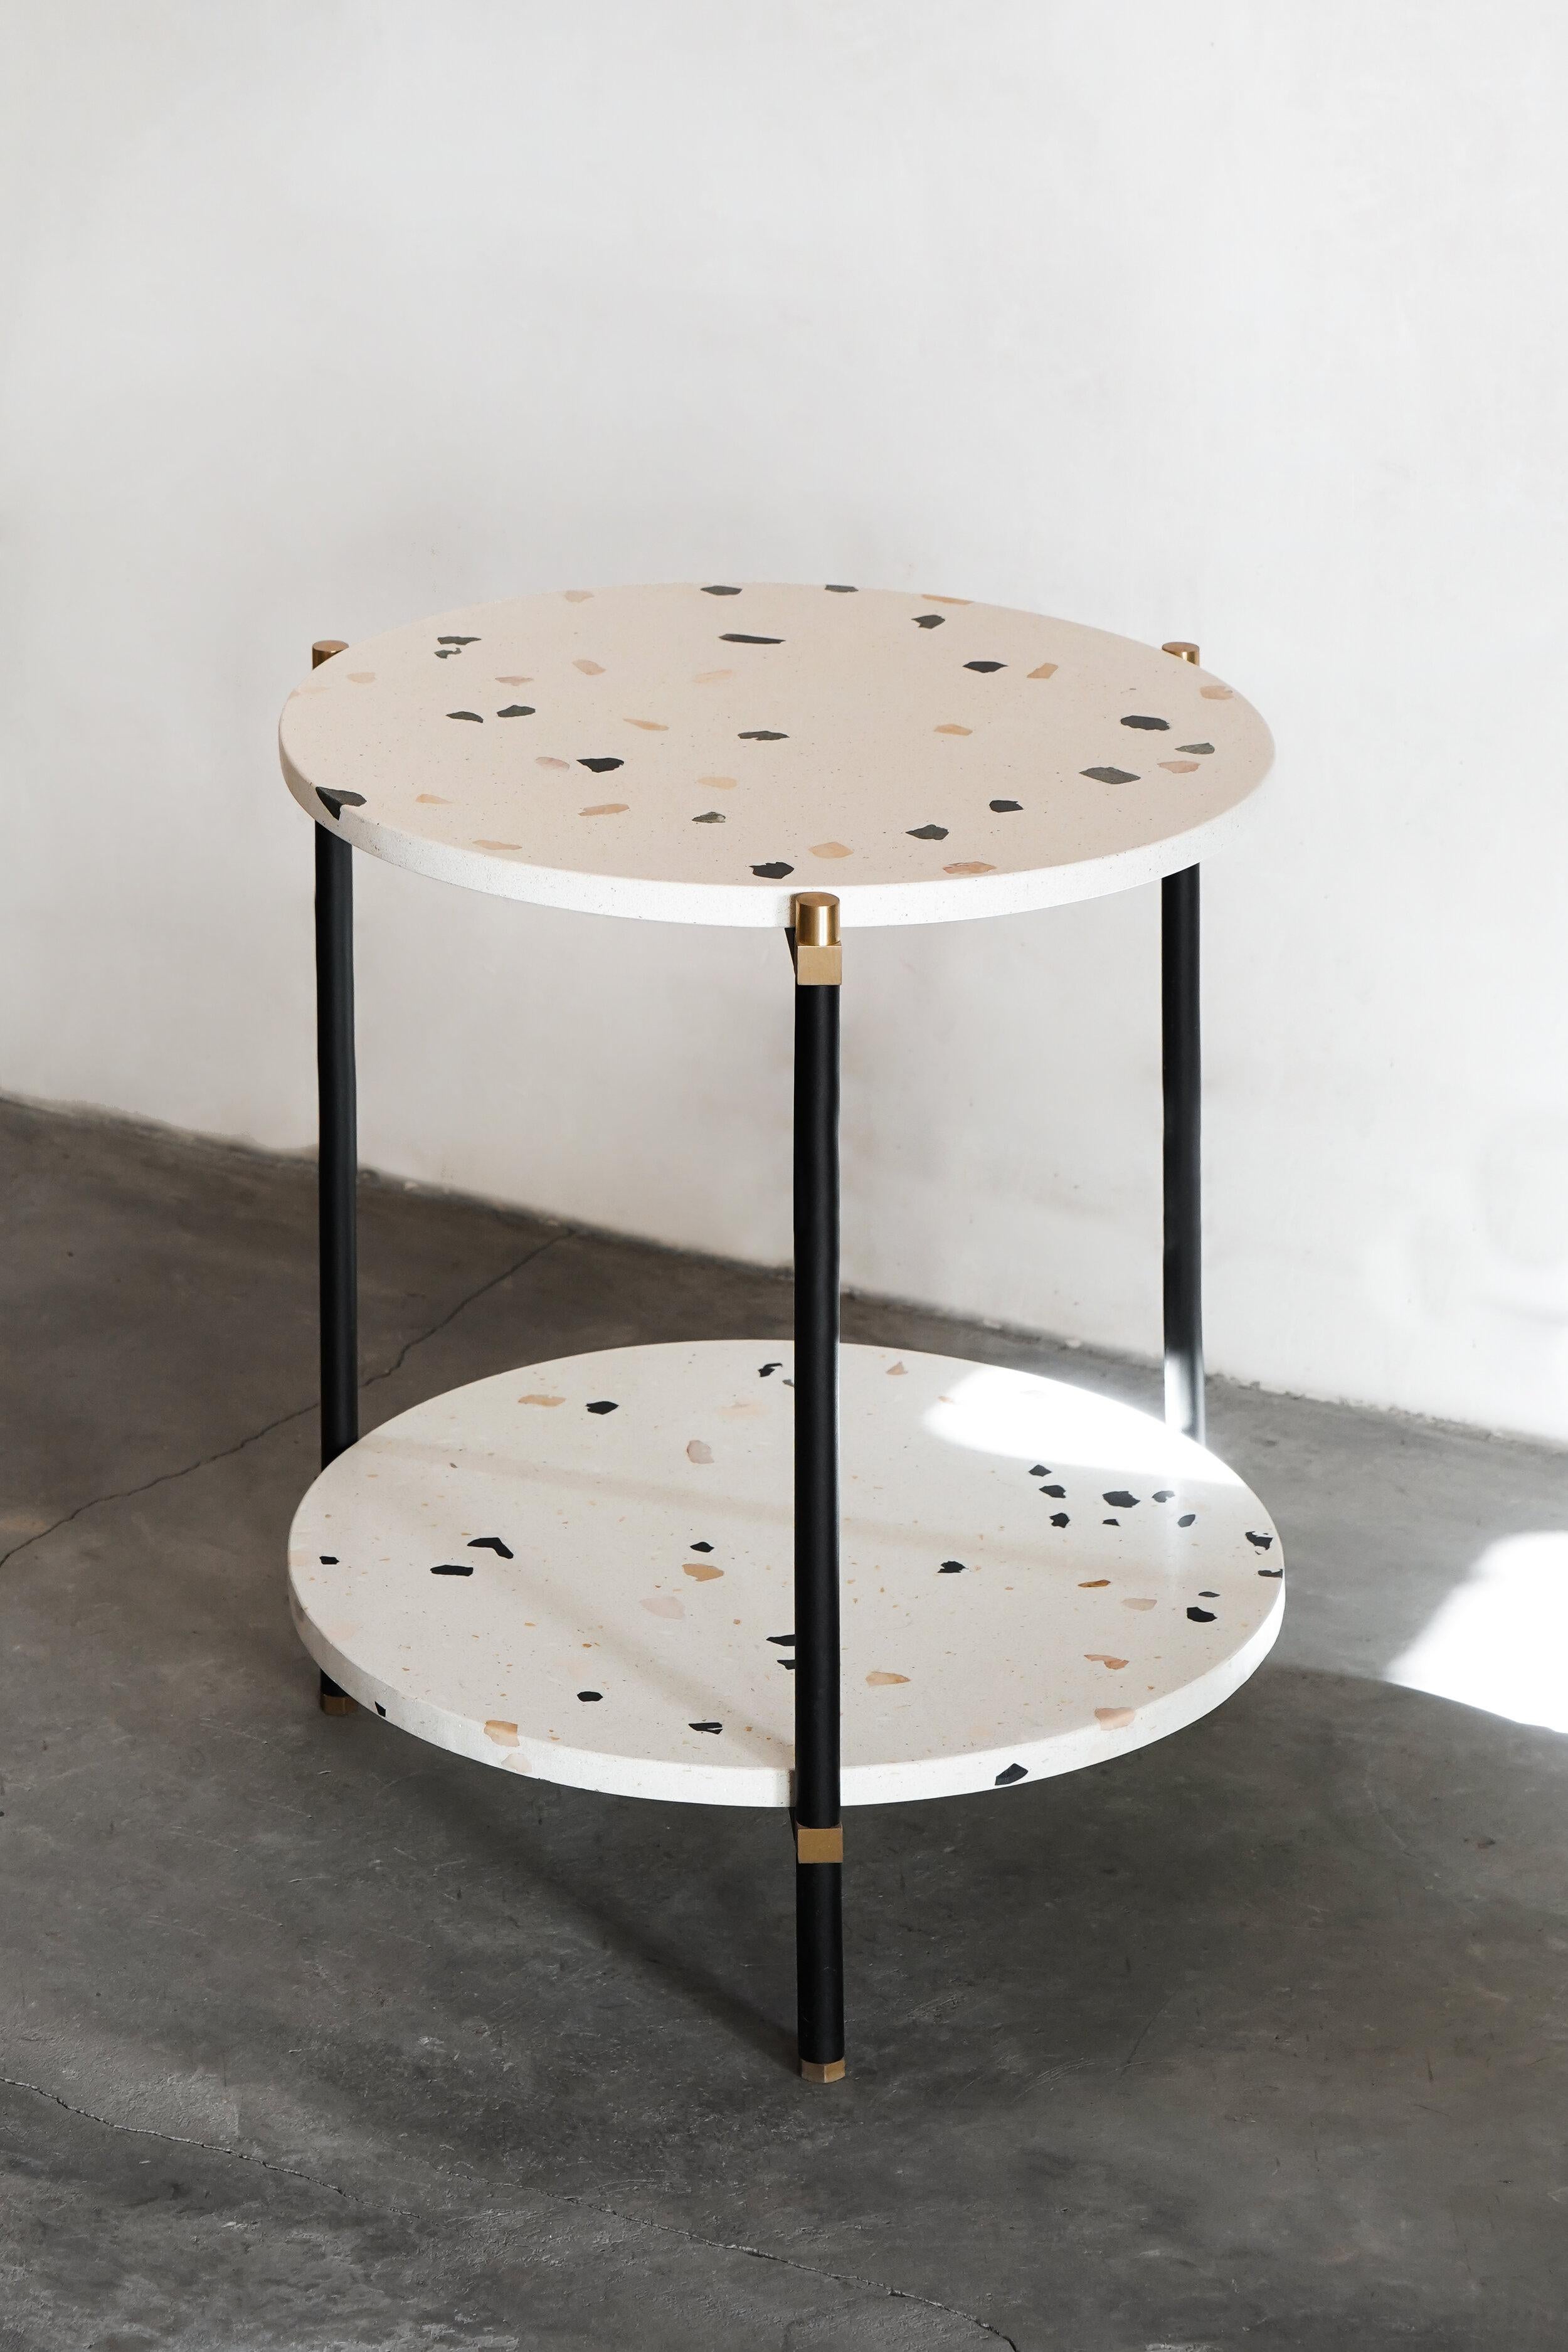 Double bar table 50 3 legs by Contain
Dimensions: D 50 x H 51 cm
Materials: Iron, brass, terrazzo, marble, stone.
Available in different finishes and dimensions.

The Connector furniture collection is based on single assembly pieces that get